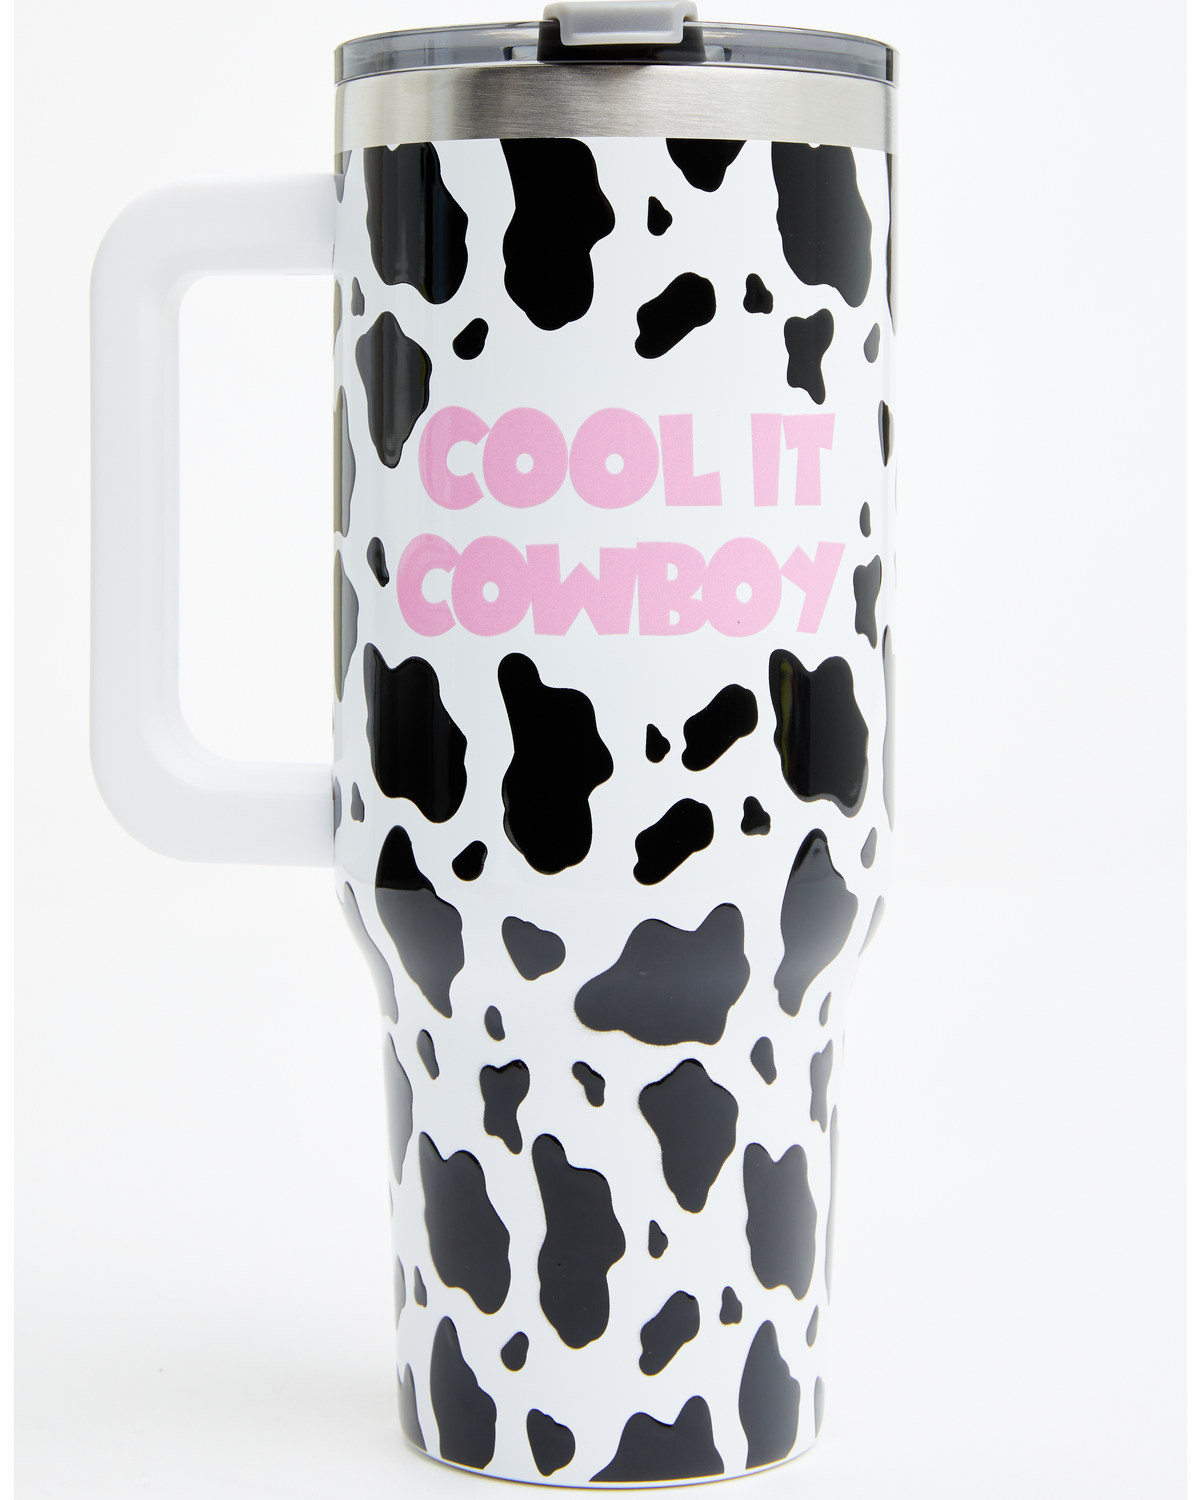 Boot Barn 40oz Cool It Cowboy Tumbler With Handle